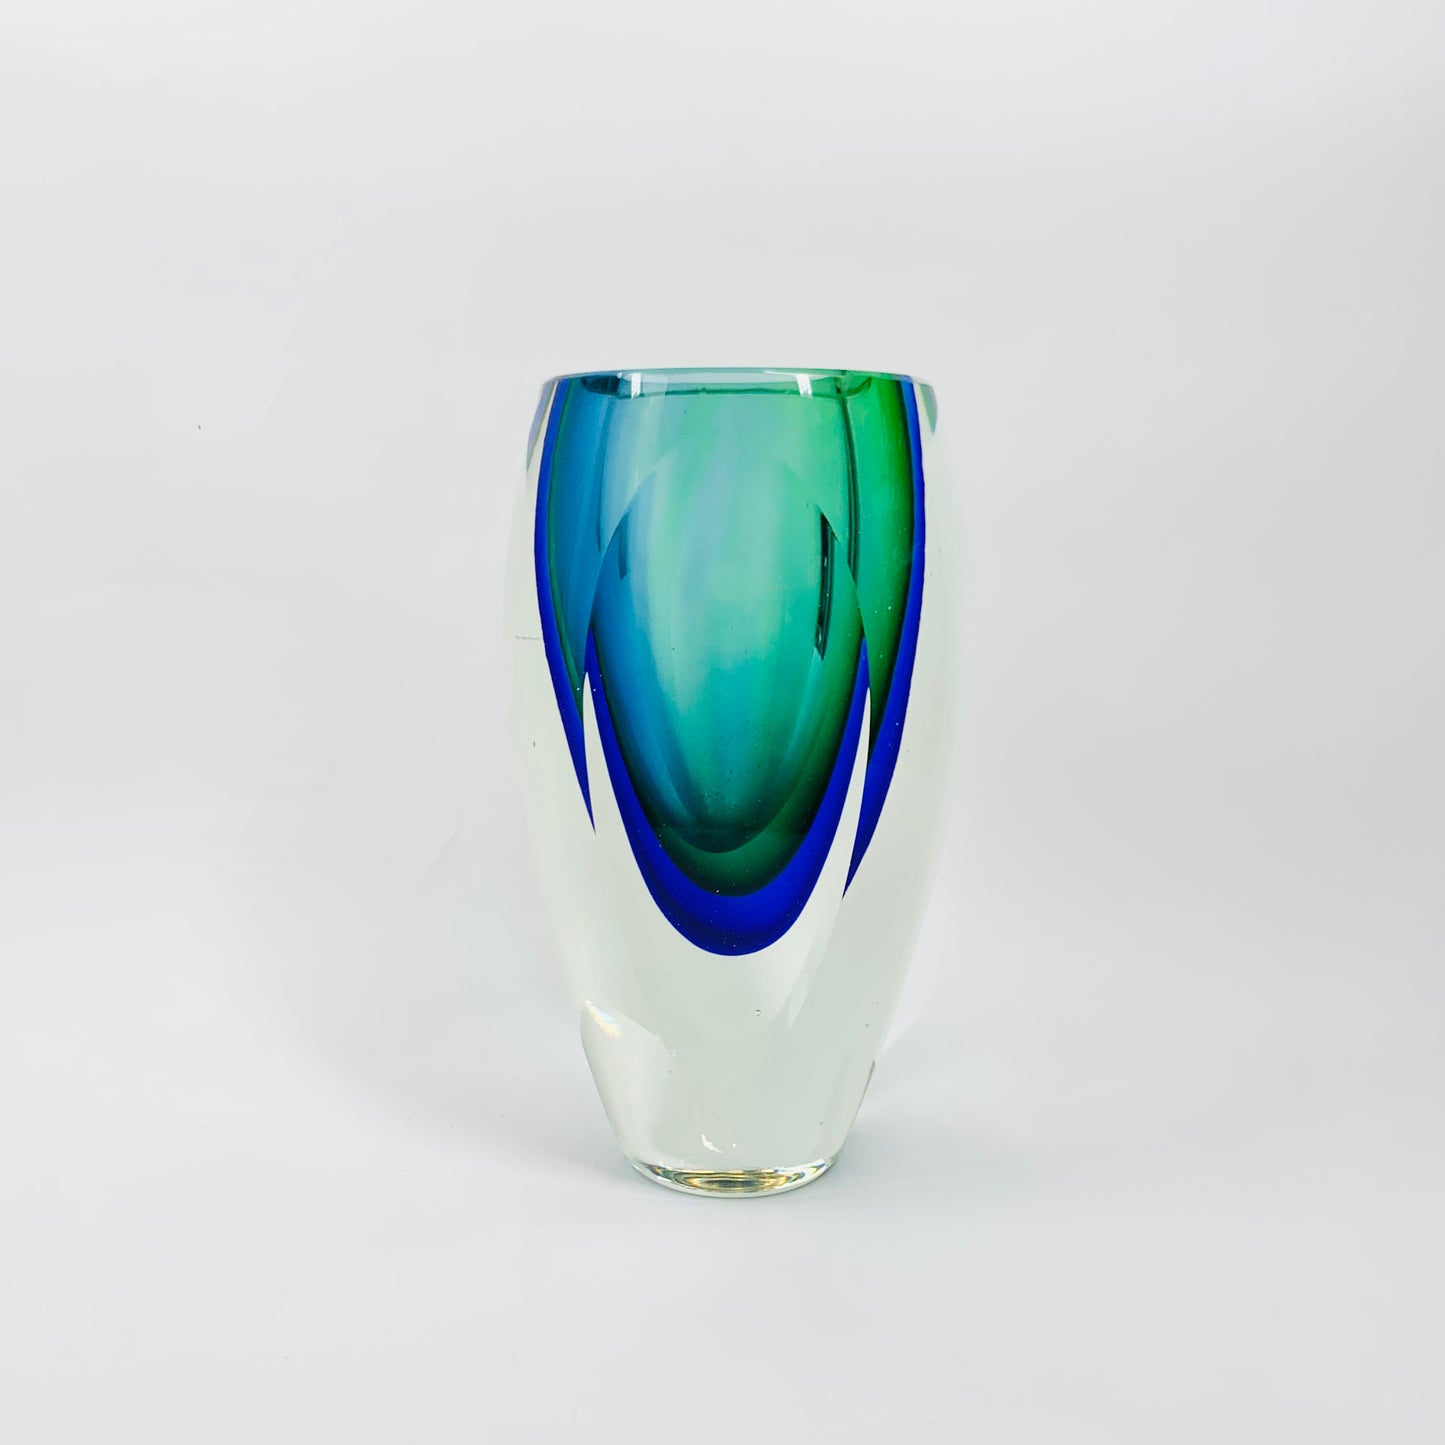 Extremely rare and heavy Murano MCM sommerso glass vase